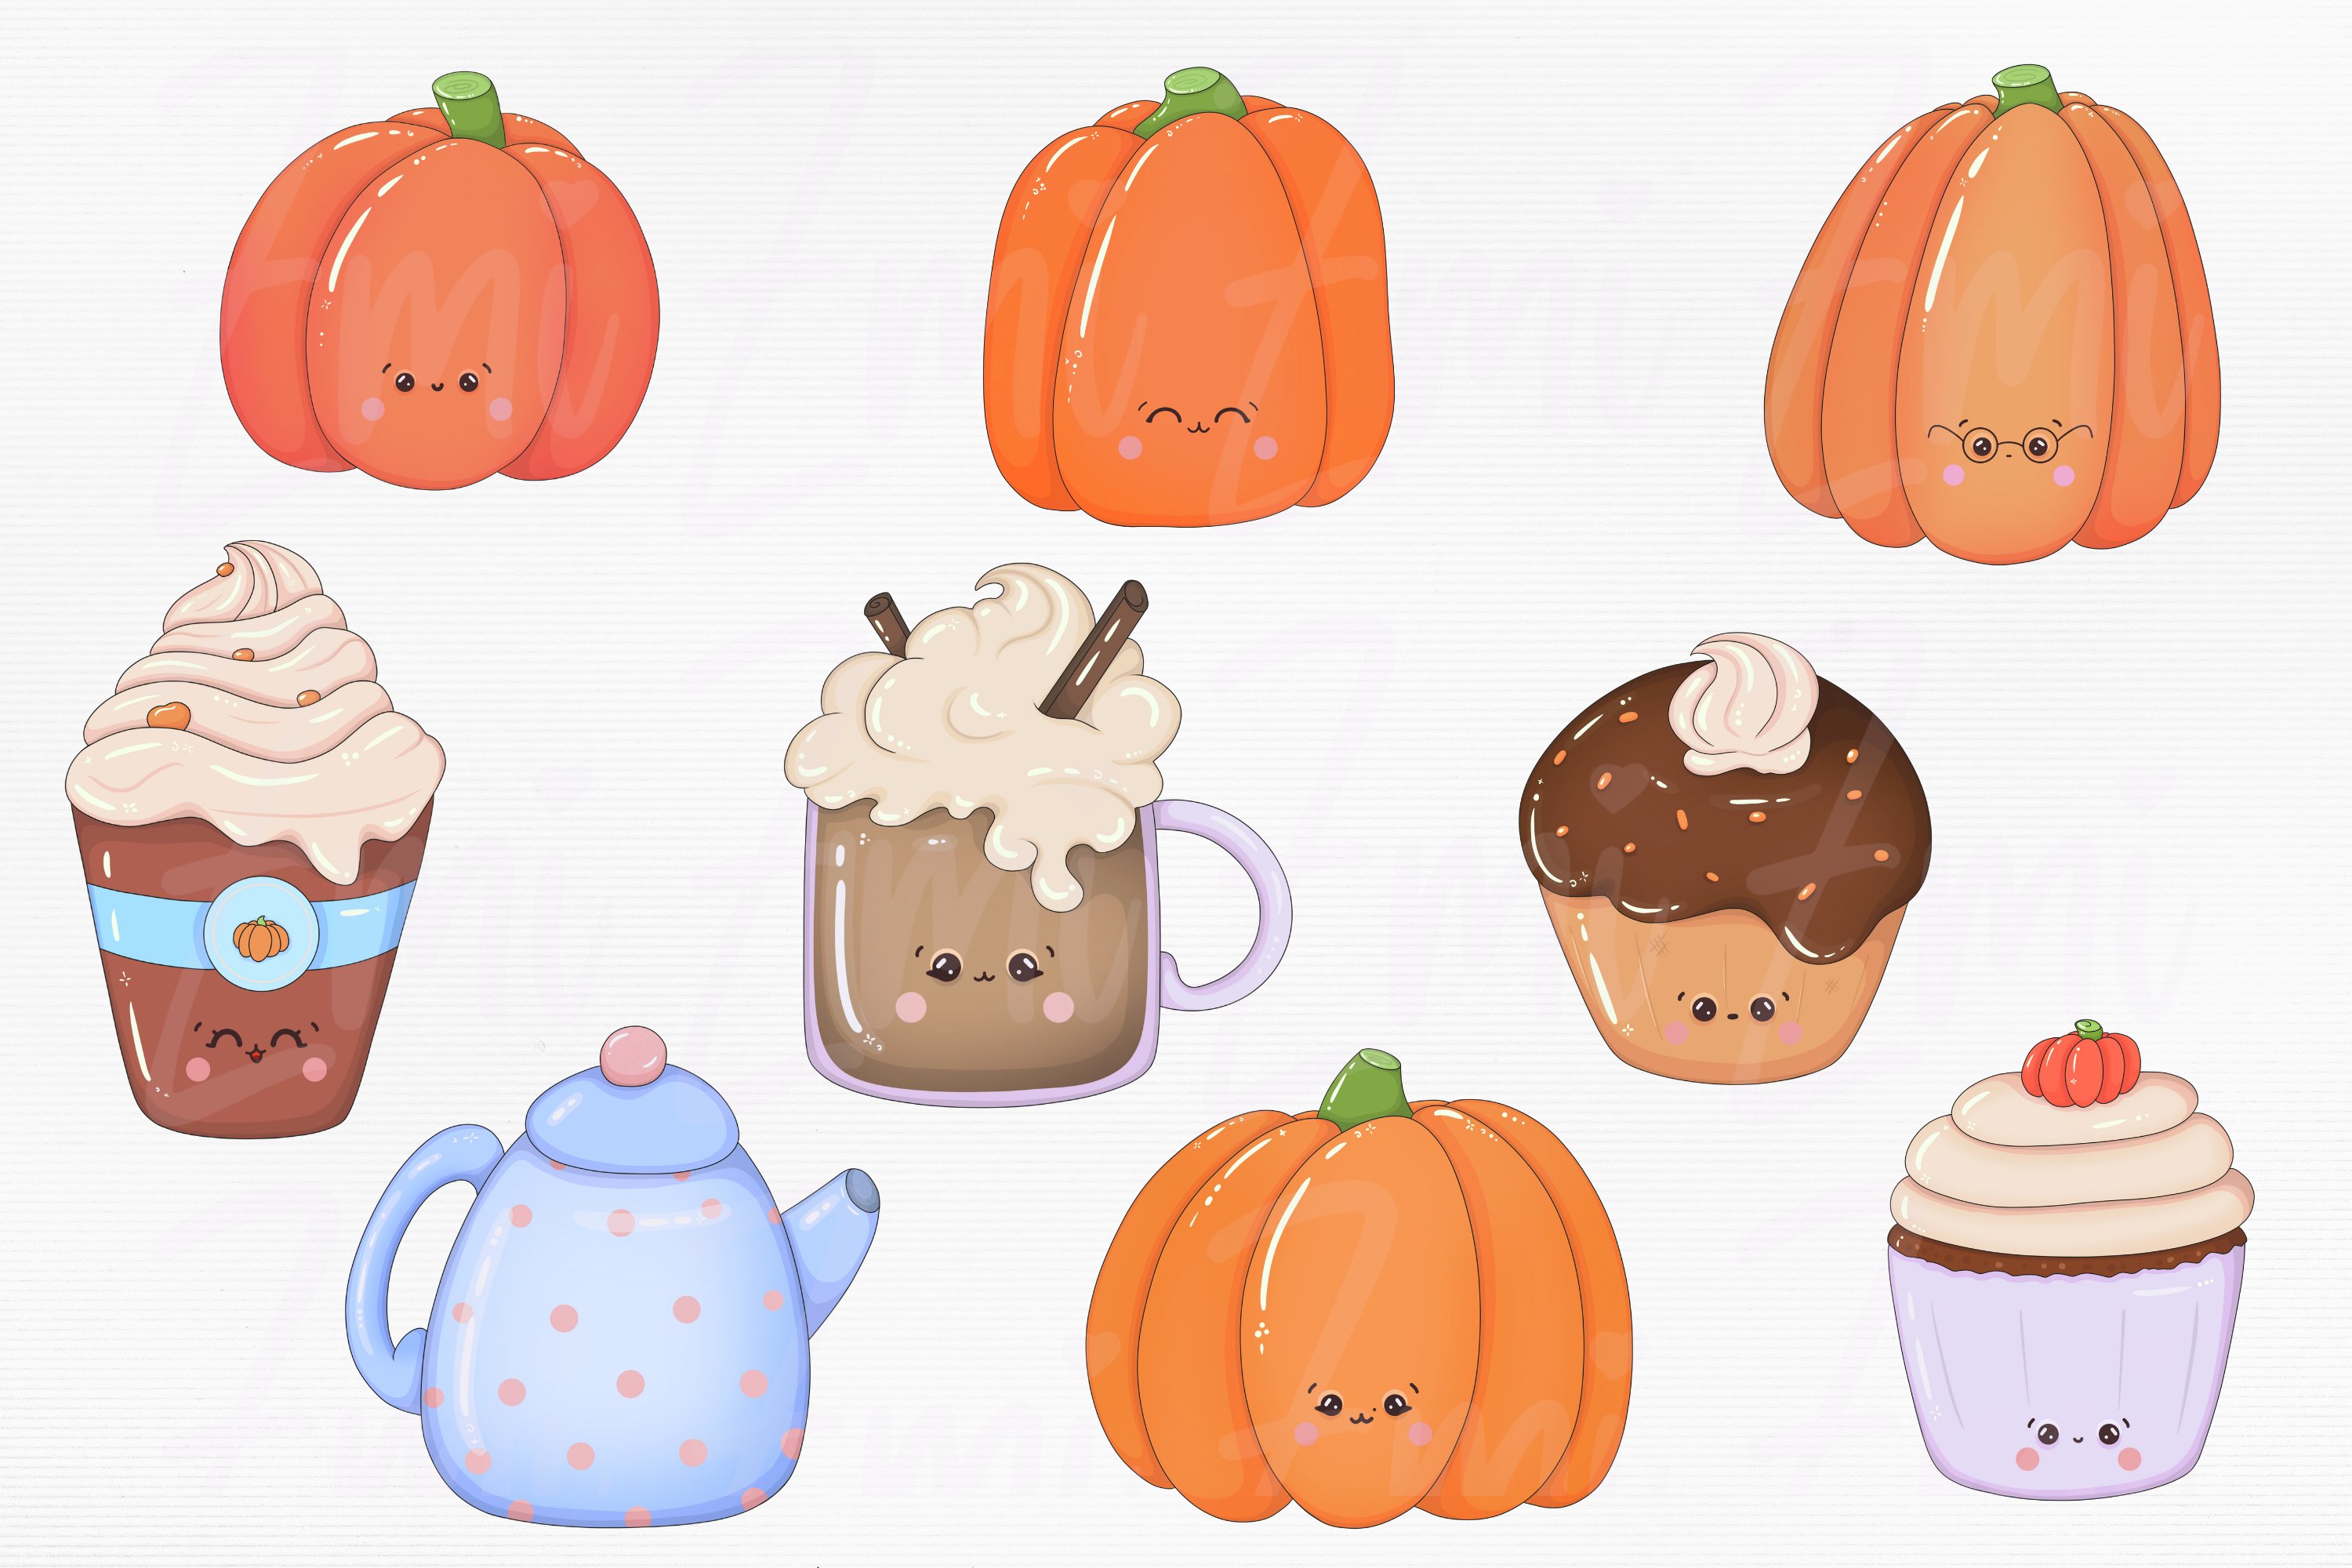 9 different illustrations of cute thanksgiving on a gray background.